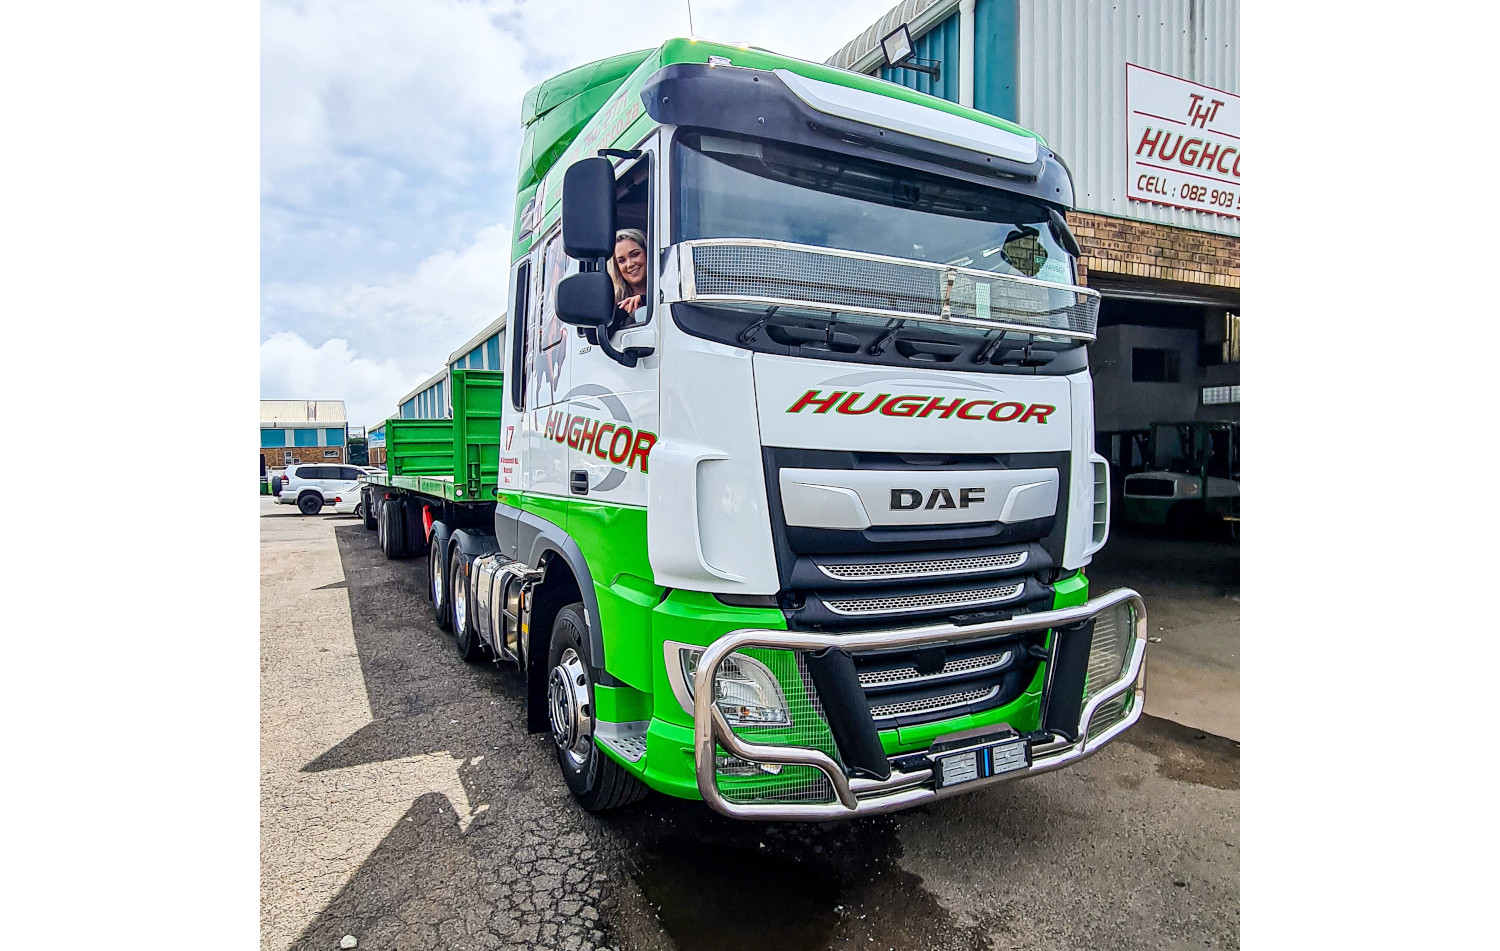 New DAF XF range launched - Truck News - Commercial Motor